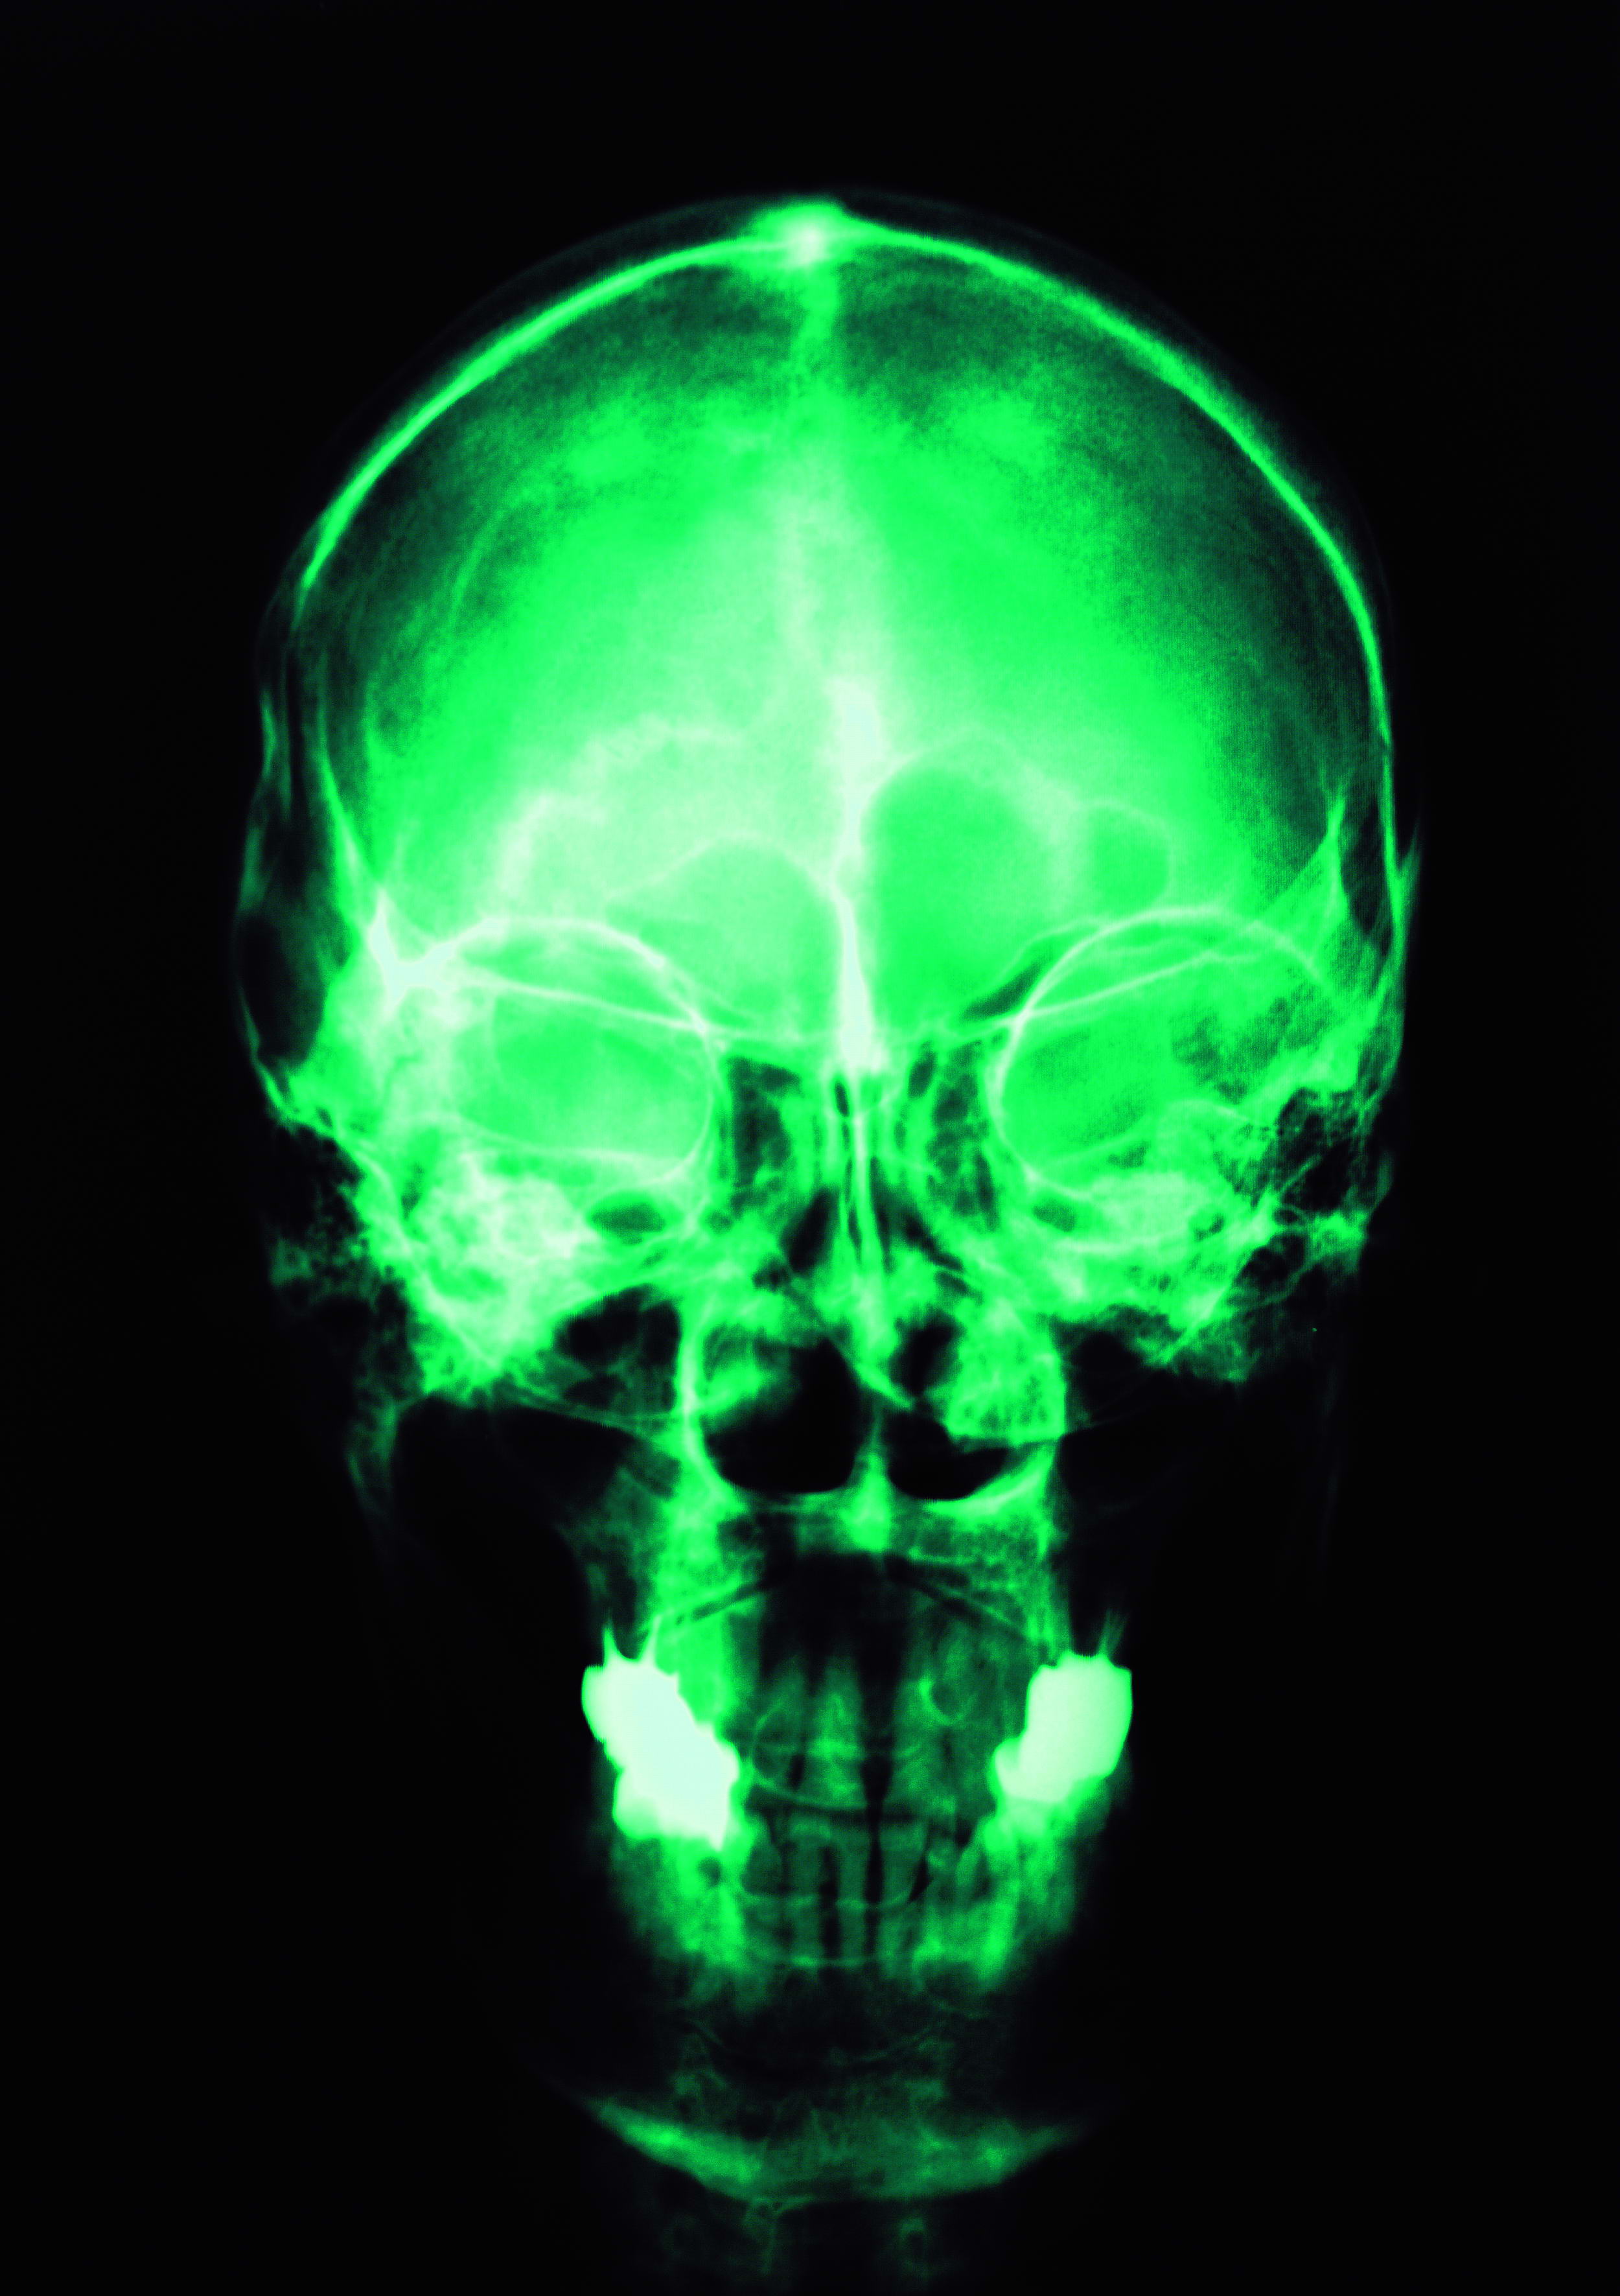 skull x-rays, texture, background, download photo, head skull x-ray texture background